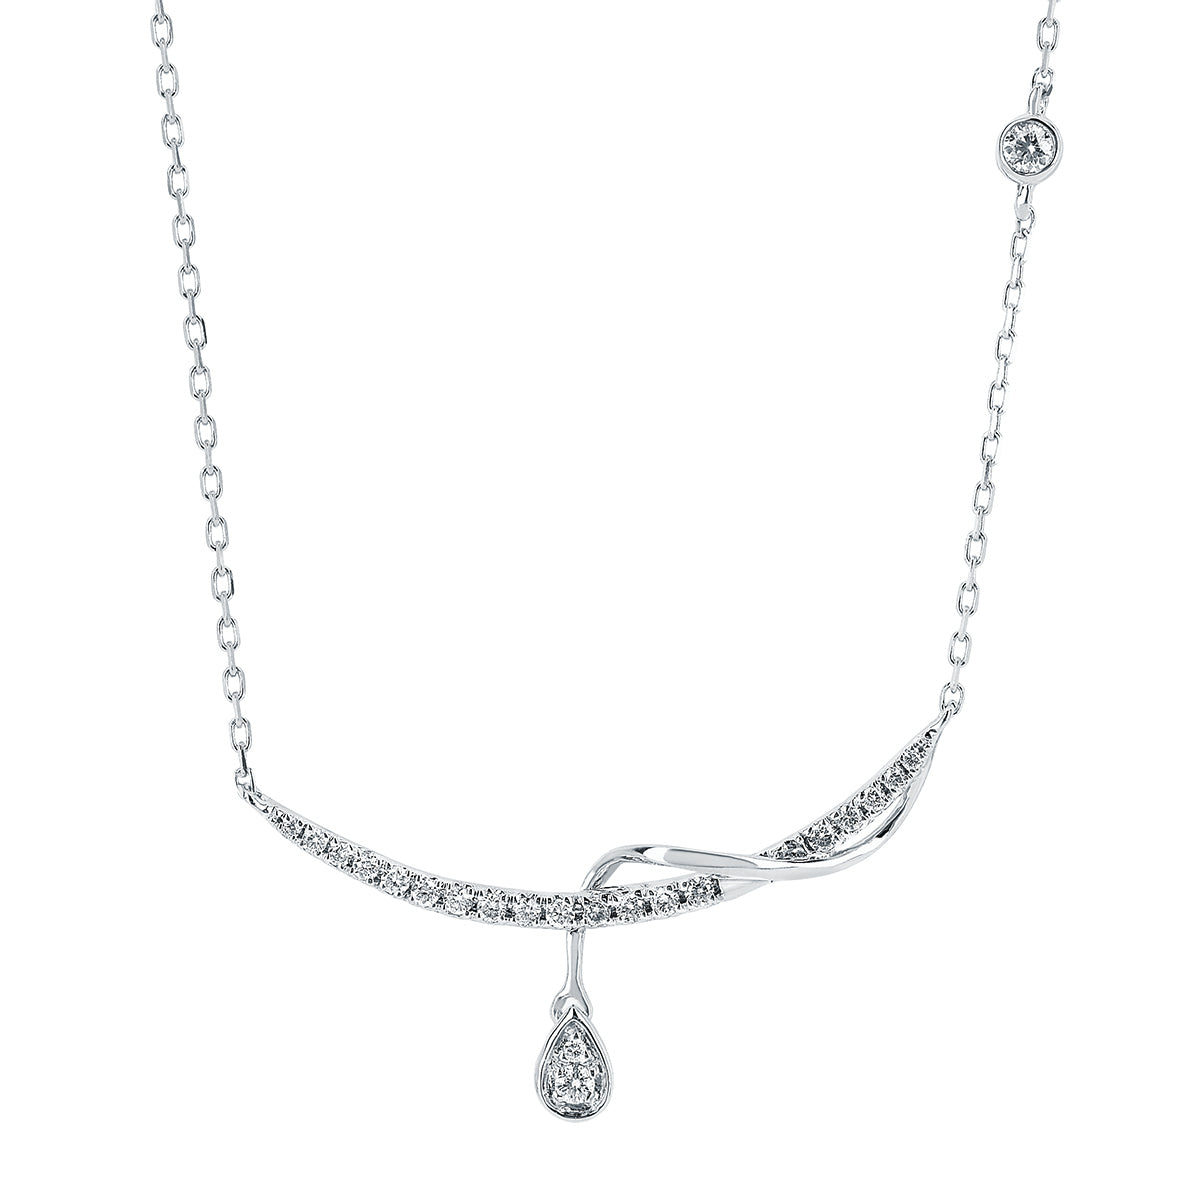 Diamond Twisted Bar Necklace with Pear Diamond Drop - White Gold - Talisman Collection Fine Jewelers